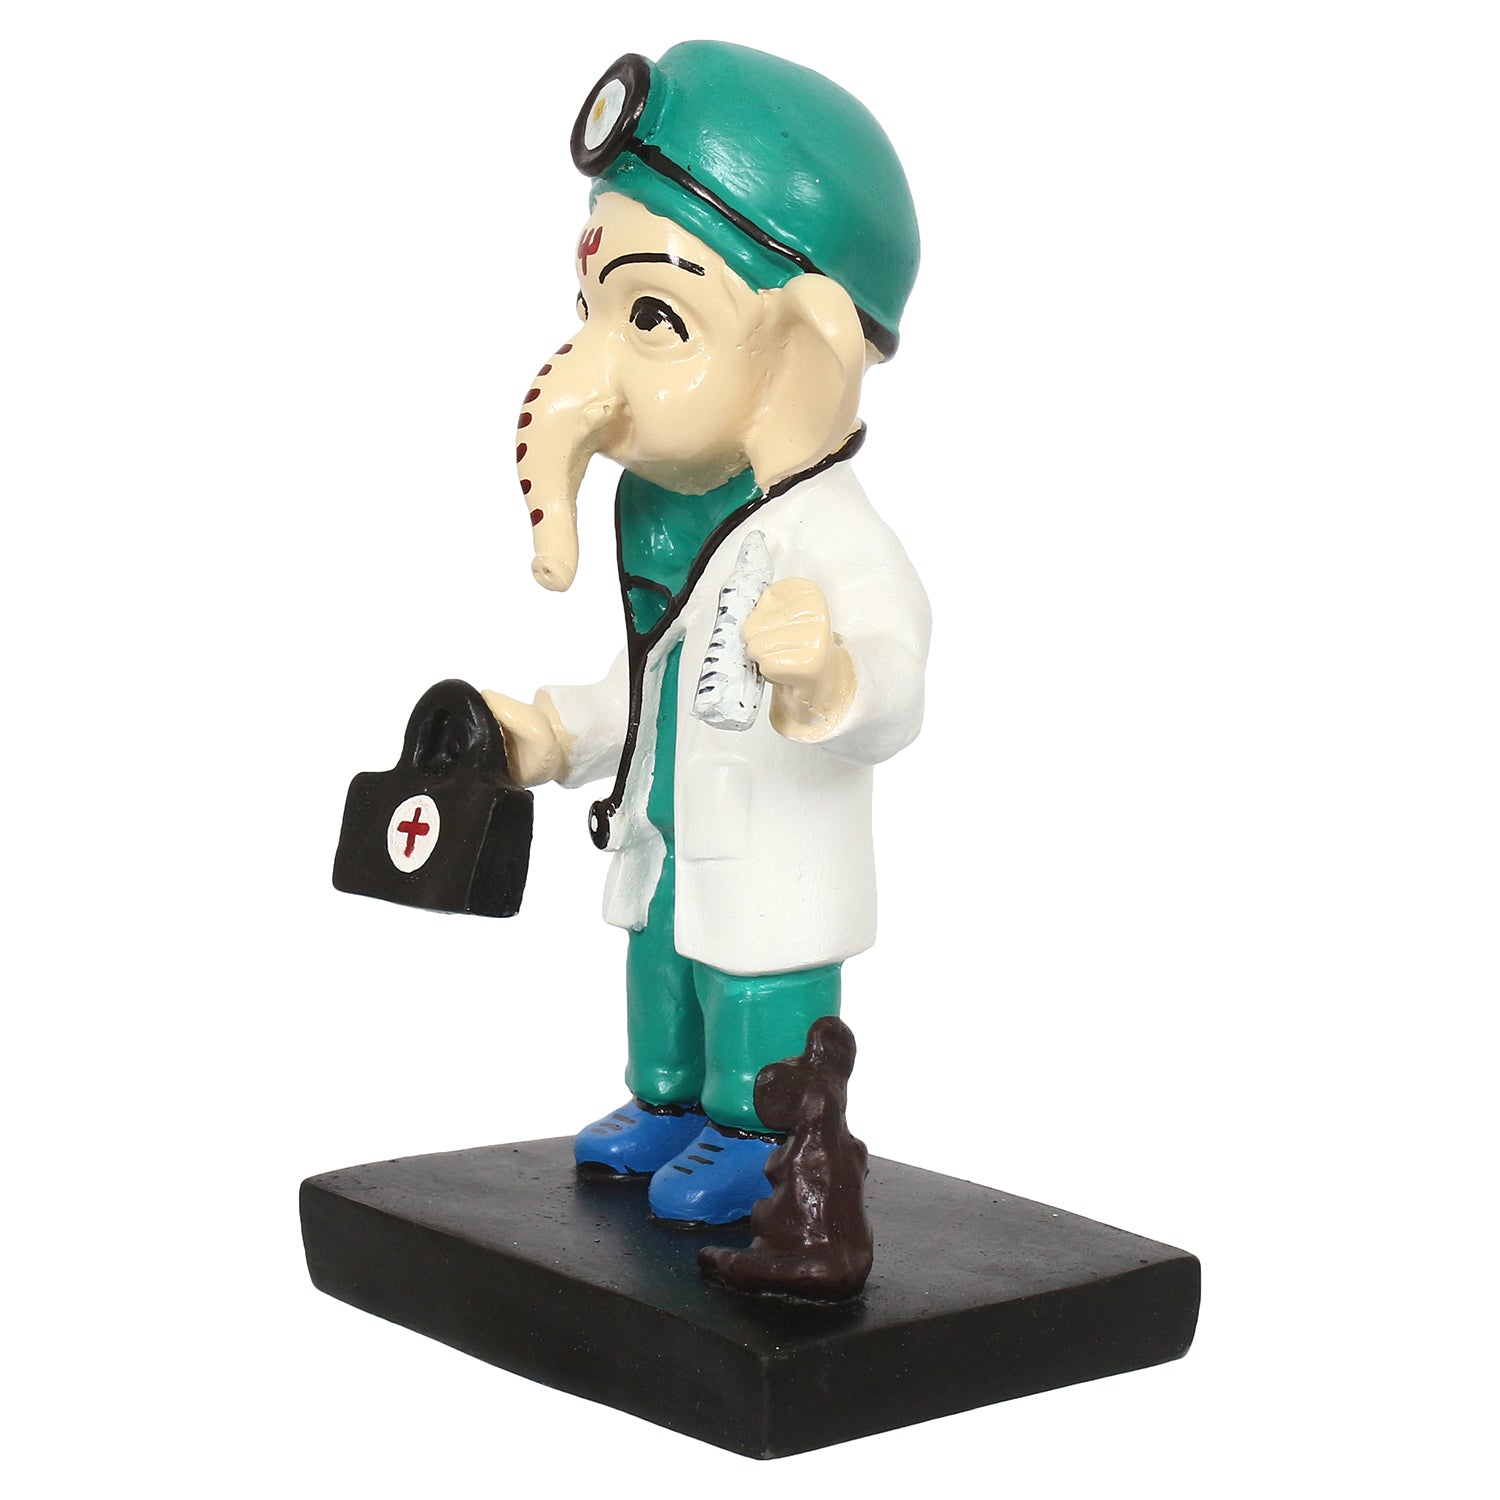 Polyresin Decorative Lord Ganesha Idol in Doctor Avatar (Green, White, Black and Blue) 5